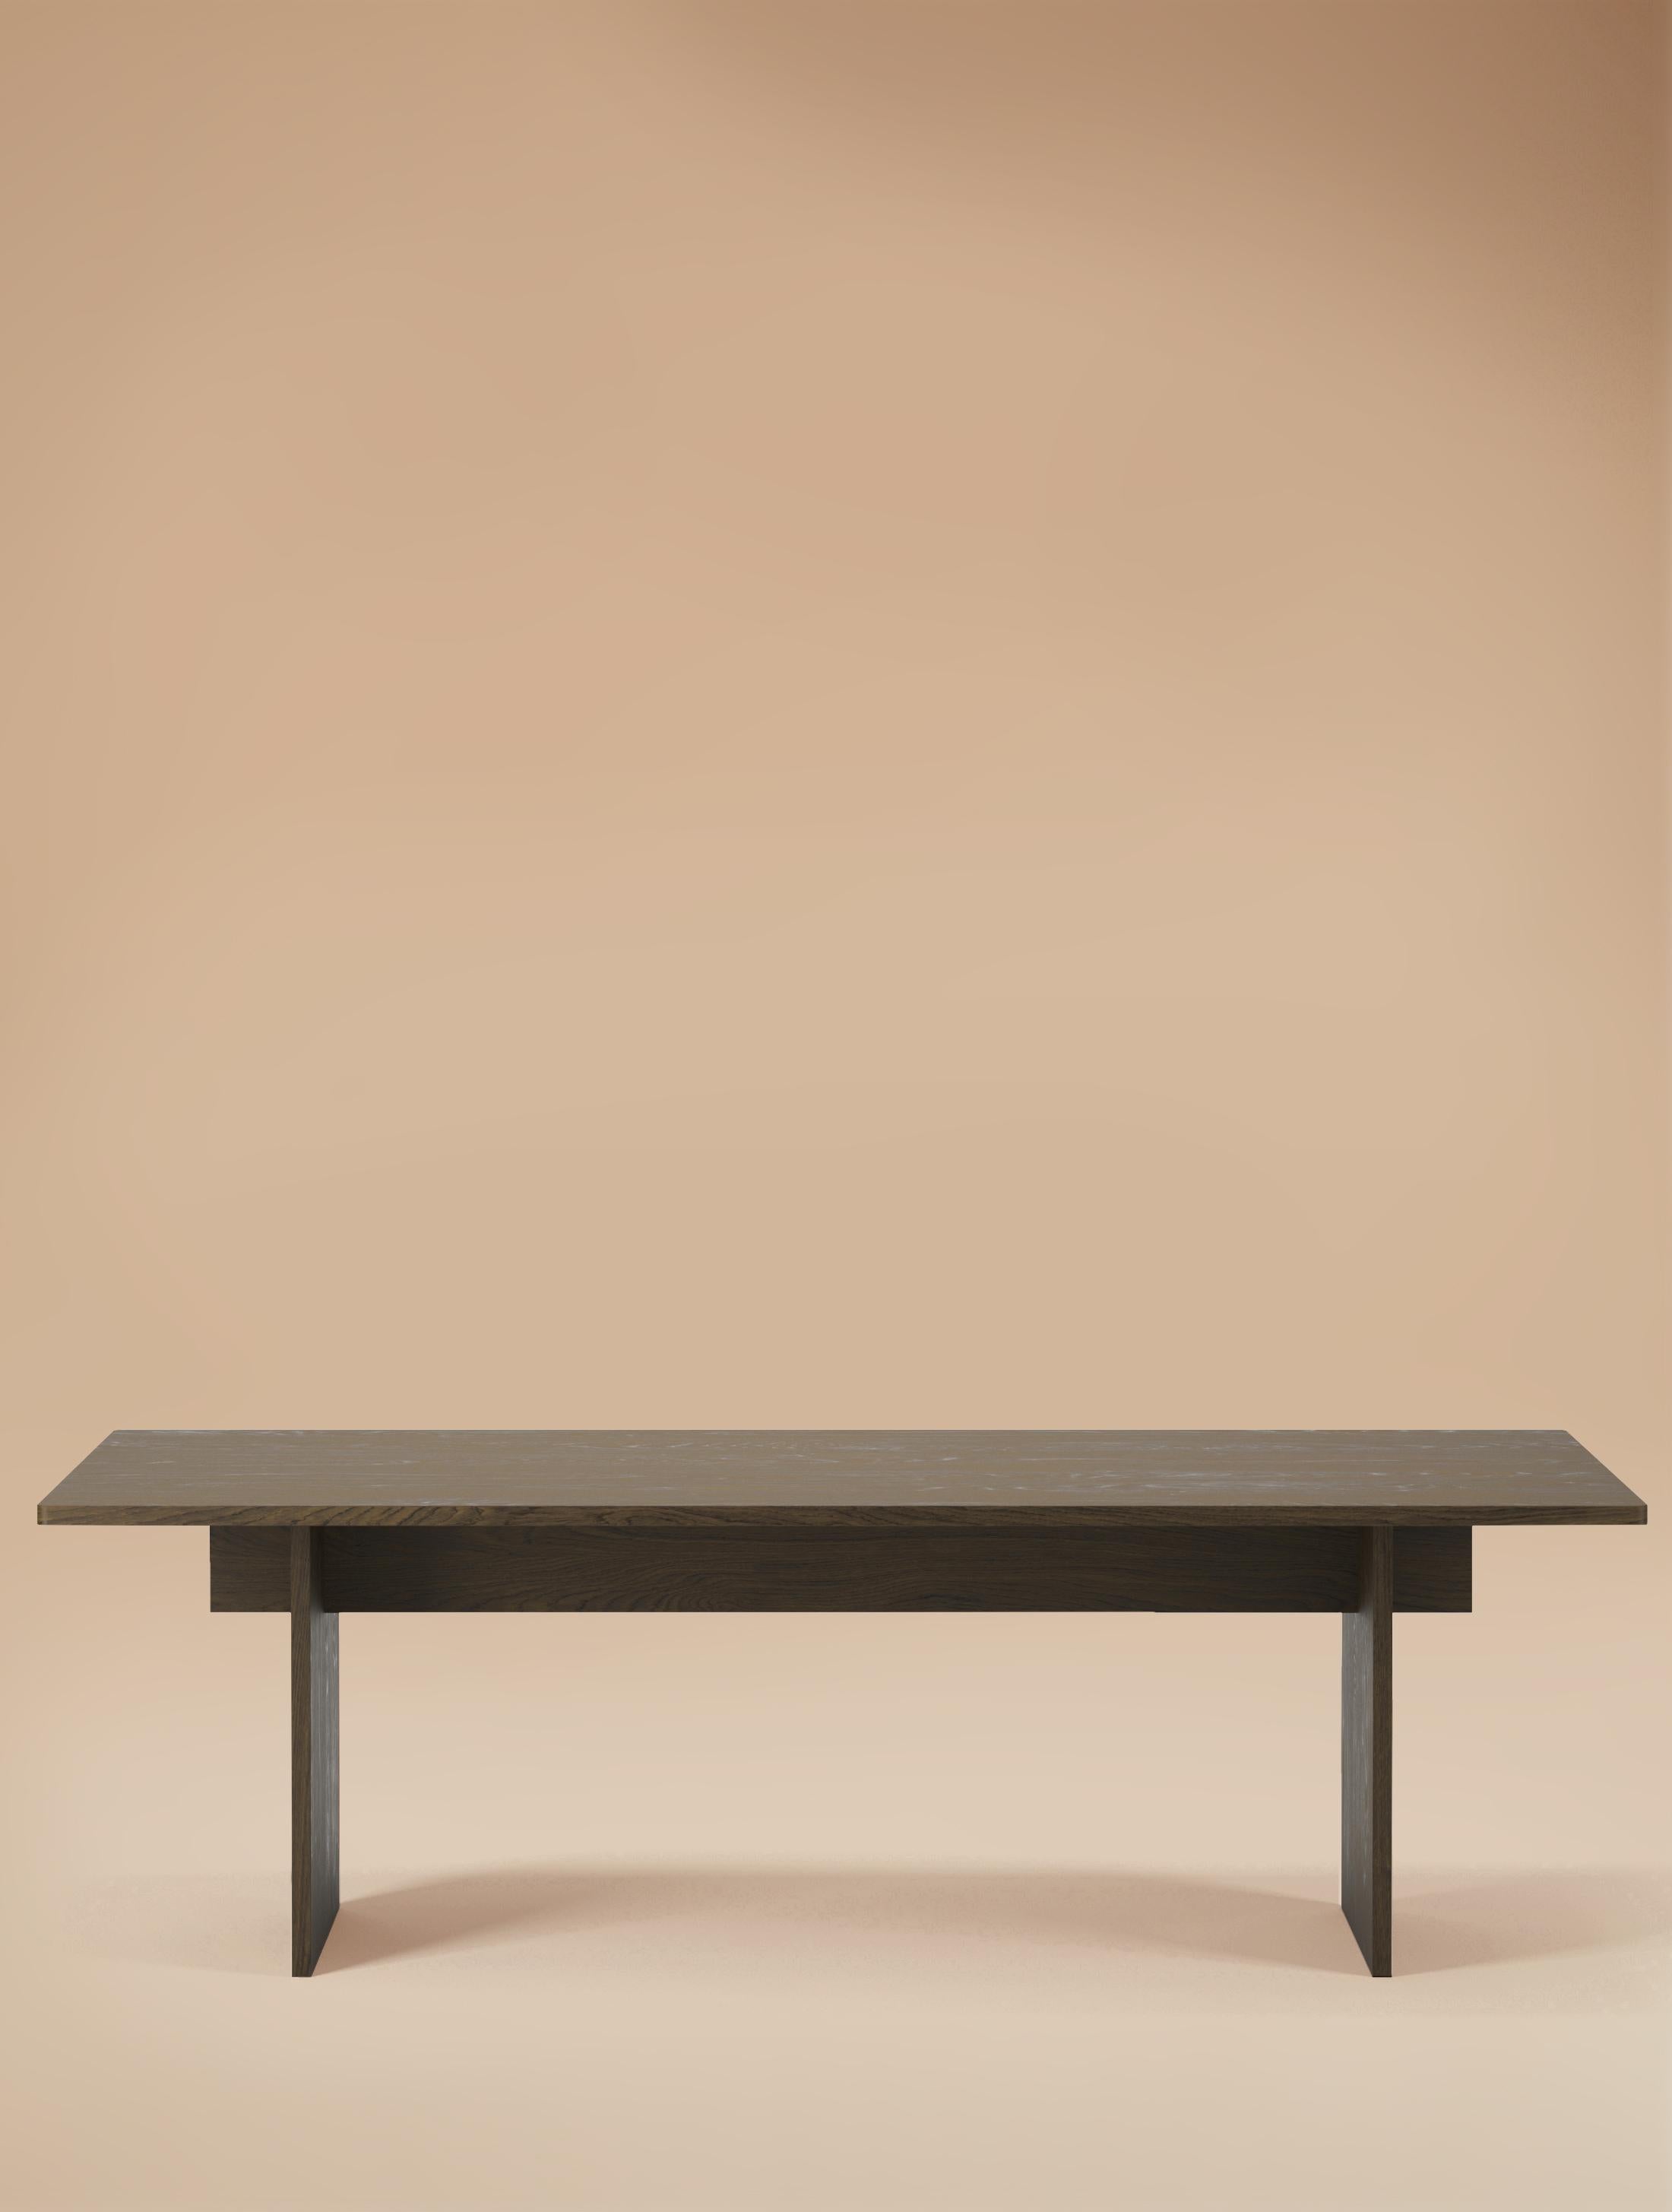 6 Seater Faure Table Handcrafted in Blackened Oiled Oak by Lemon 1